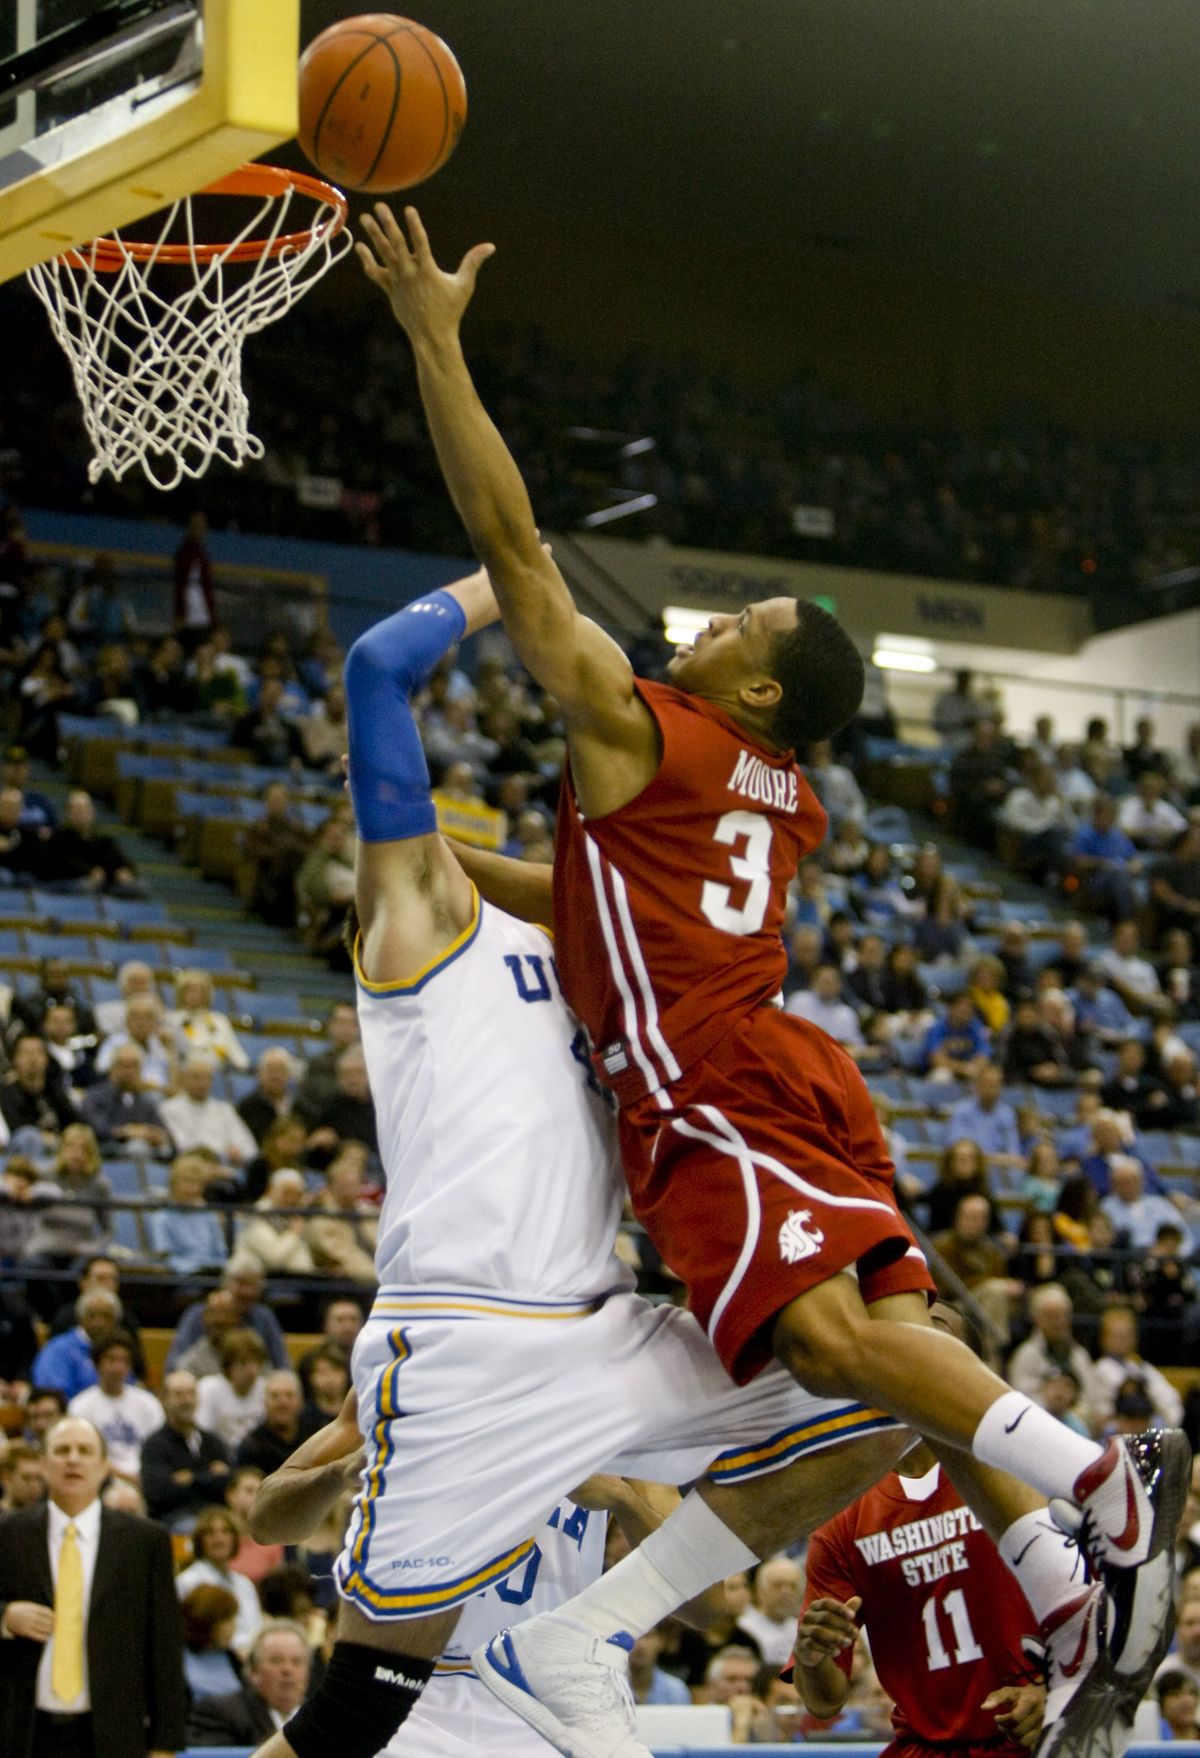 Washington State guard Reggie Moore, right, lays the ball in over UCLA forward Nikola Dragovic during the first half of an NCAA college basketball game, Saturday, Jan. 23, 2010, in Los Angeles. (Bret Hartman / Associated Press)